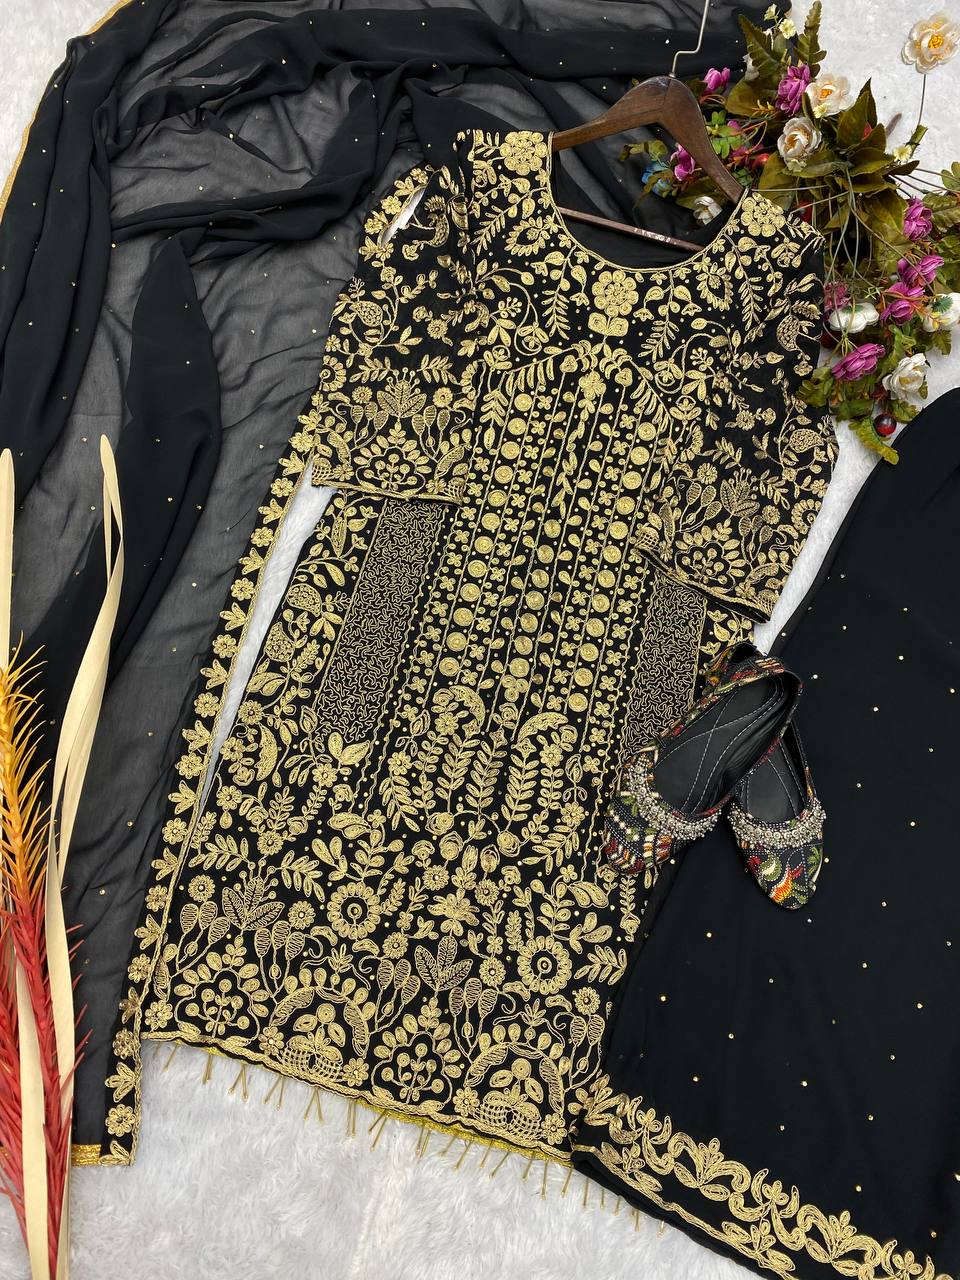 Graceful Black Color Georgette Diamond Sequence Embroidered Work Salwar Suit